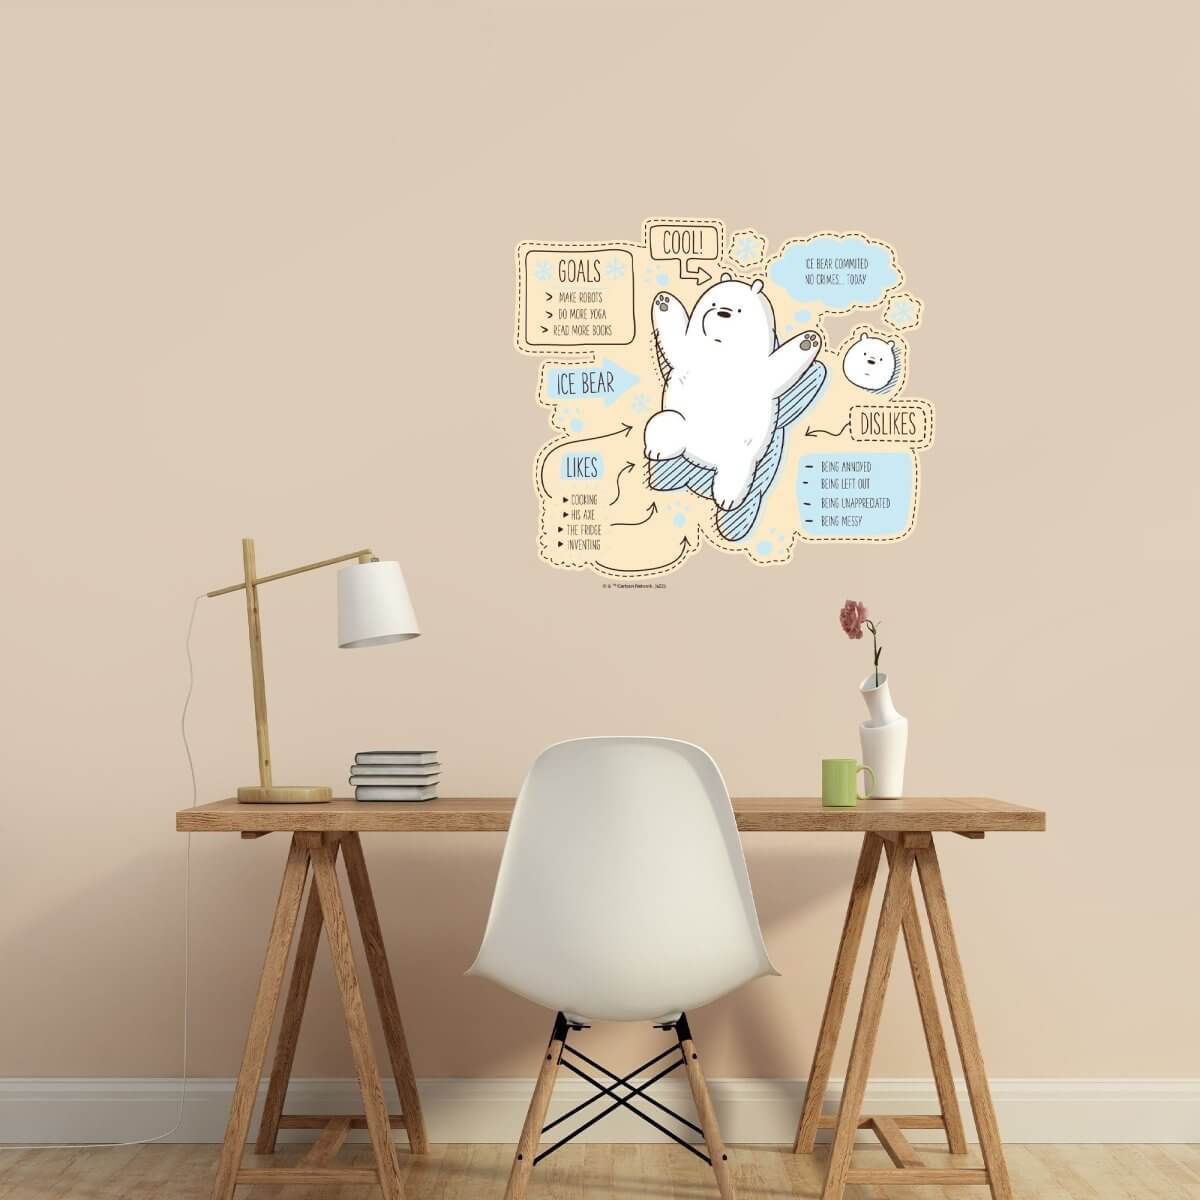 Kismet Decals Home & Room Decor We Bare Bears Ice Bear 101 Wall decal sticker - officially licensed - latex printed with no solvent odor - Kismet Decals